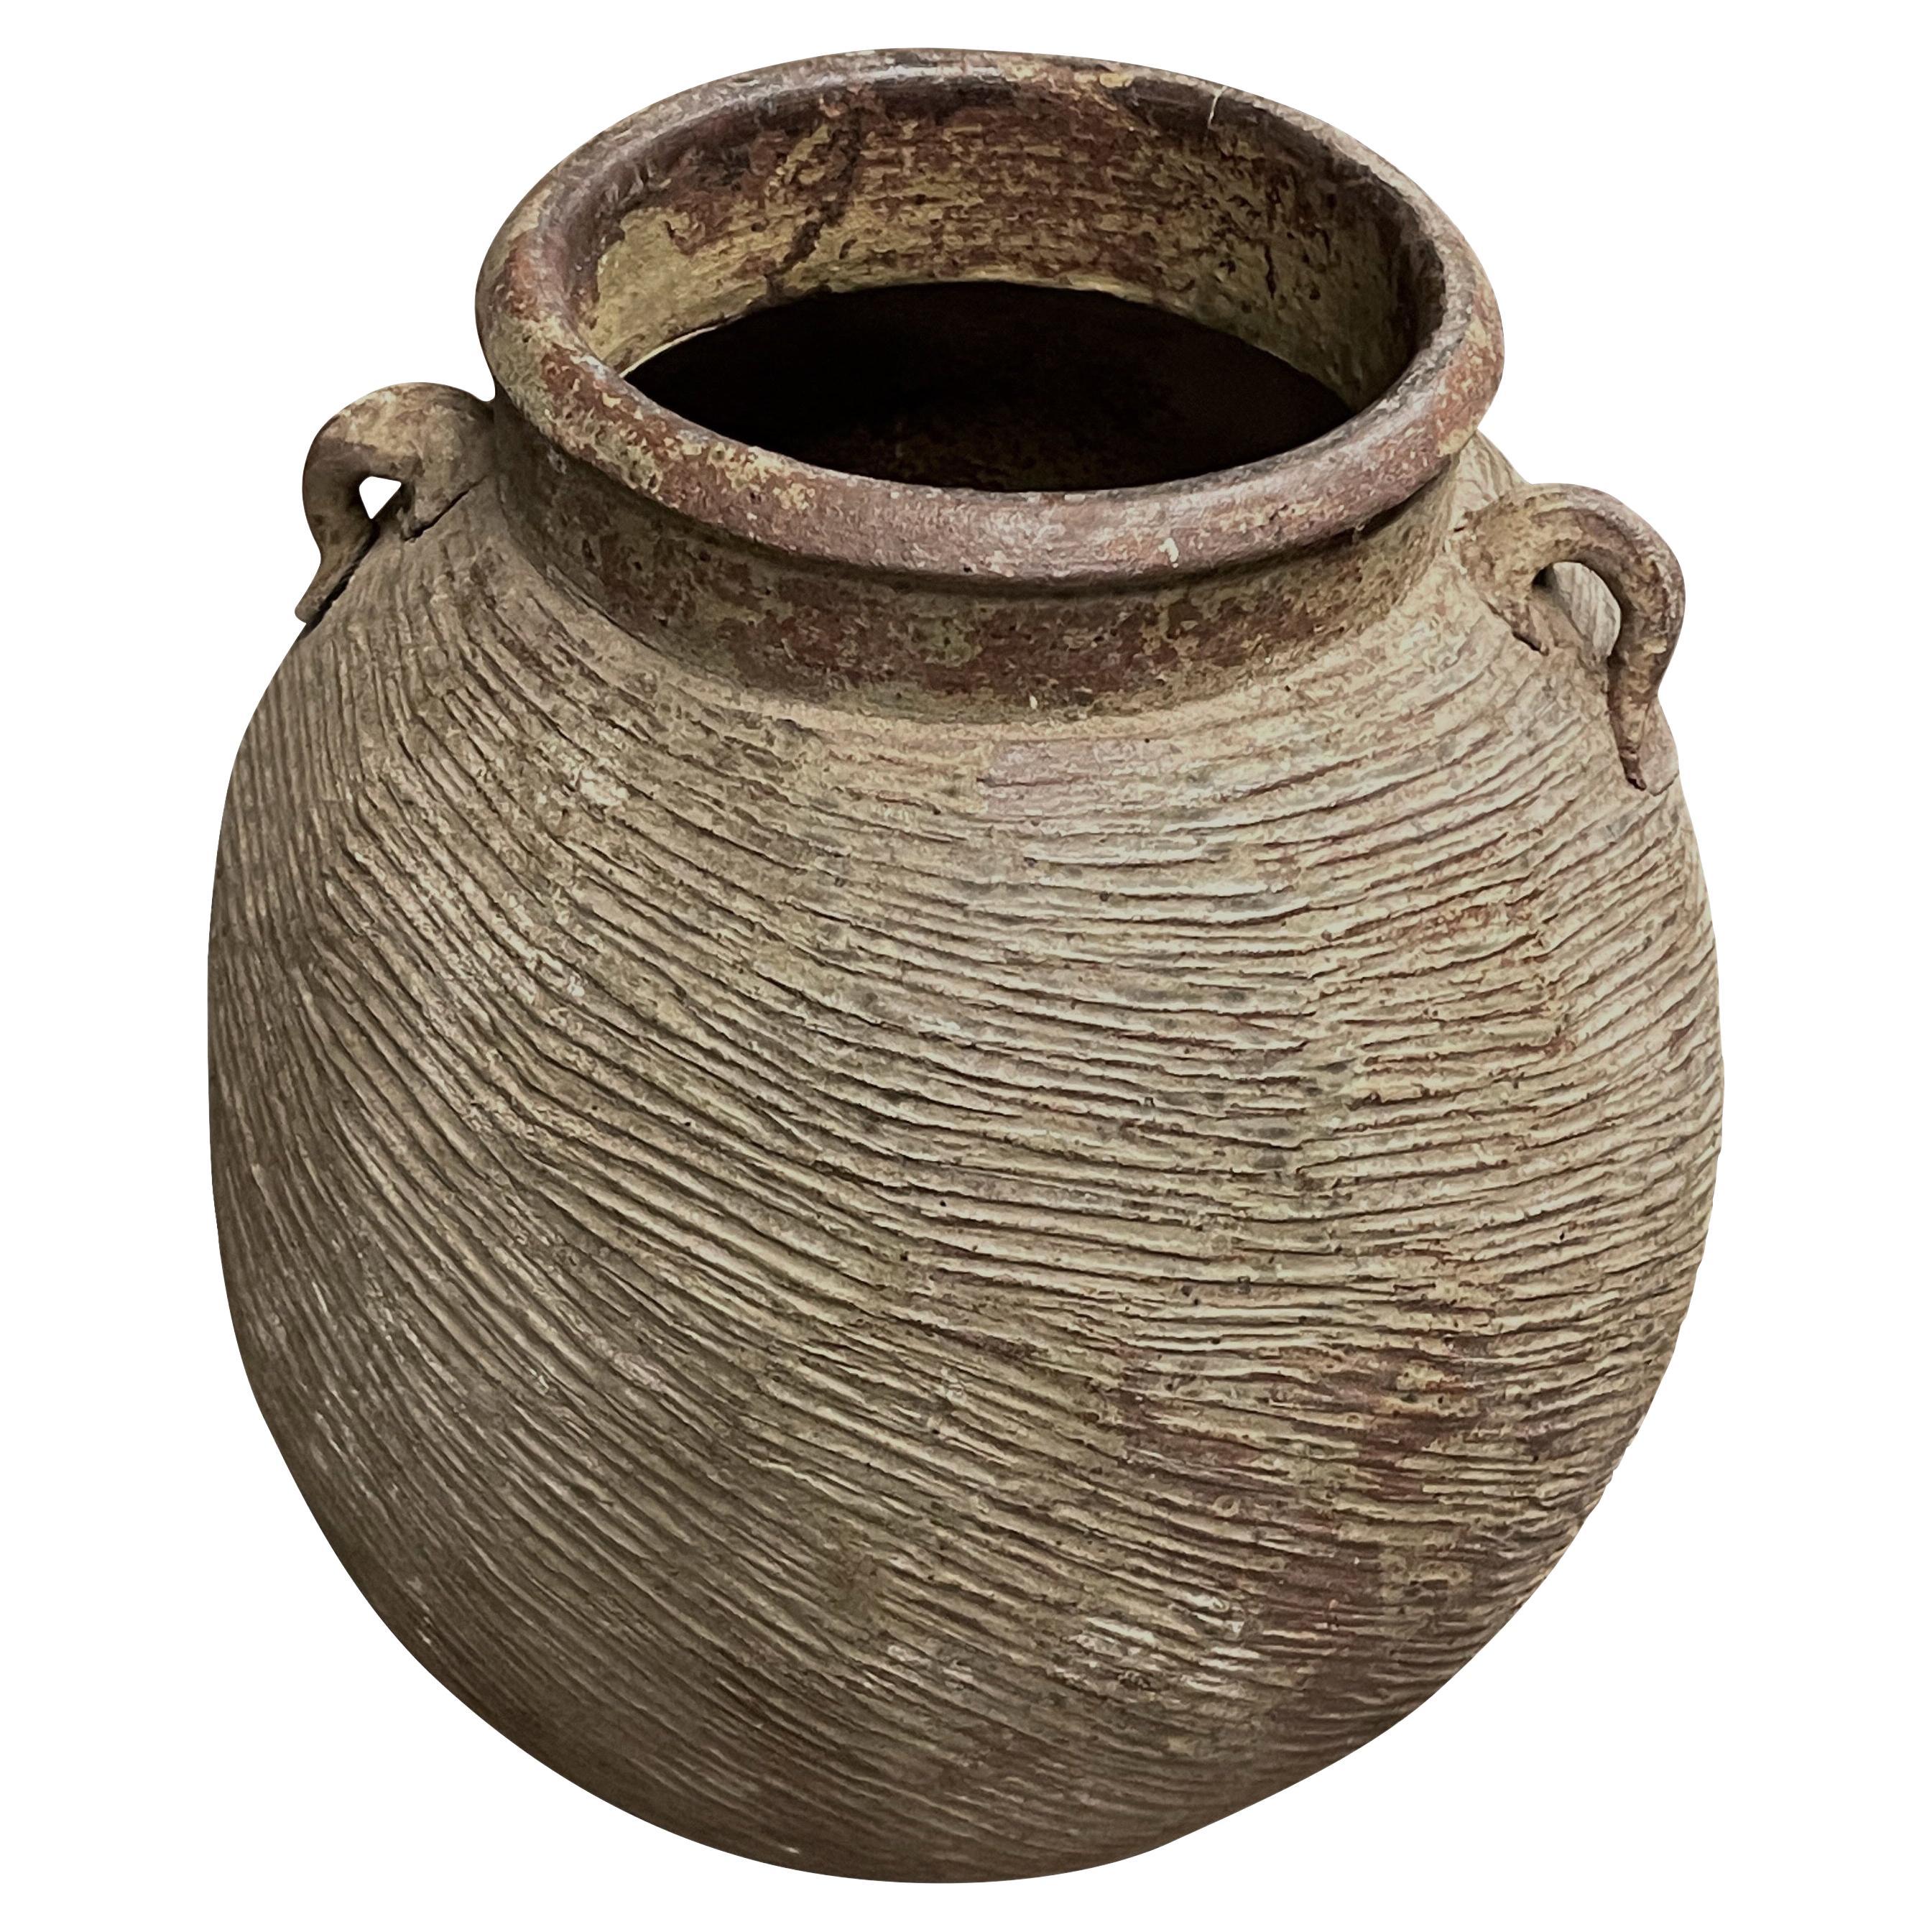 Brown Rib Textured With Handles Stoneware Vase, China, 1940s For Sale